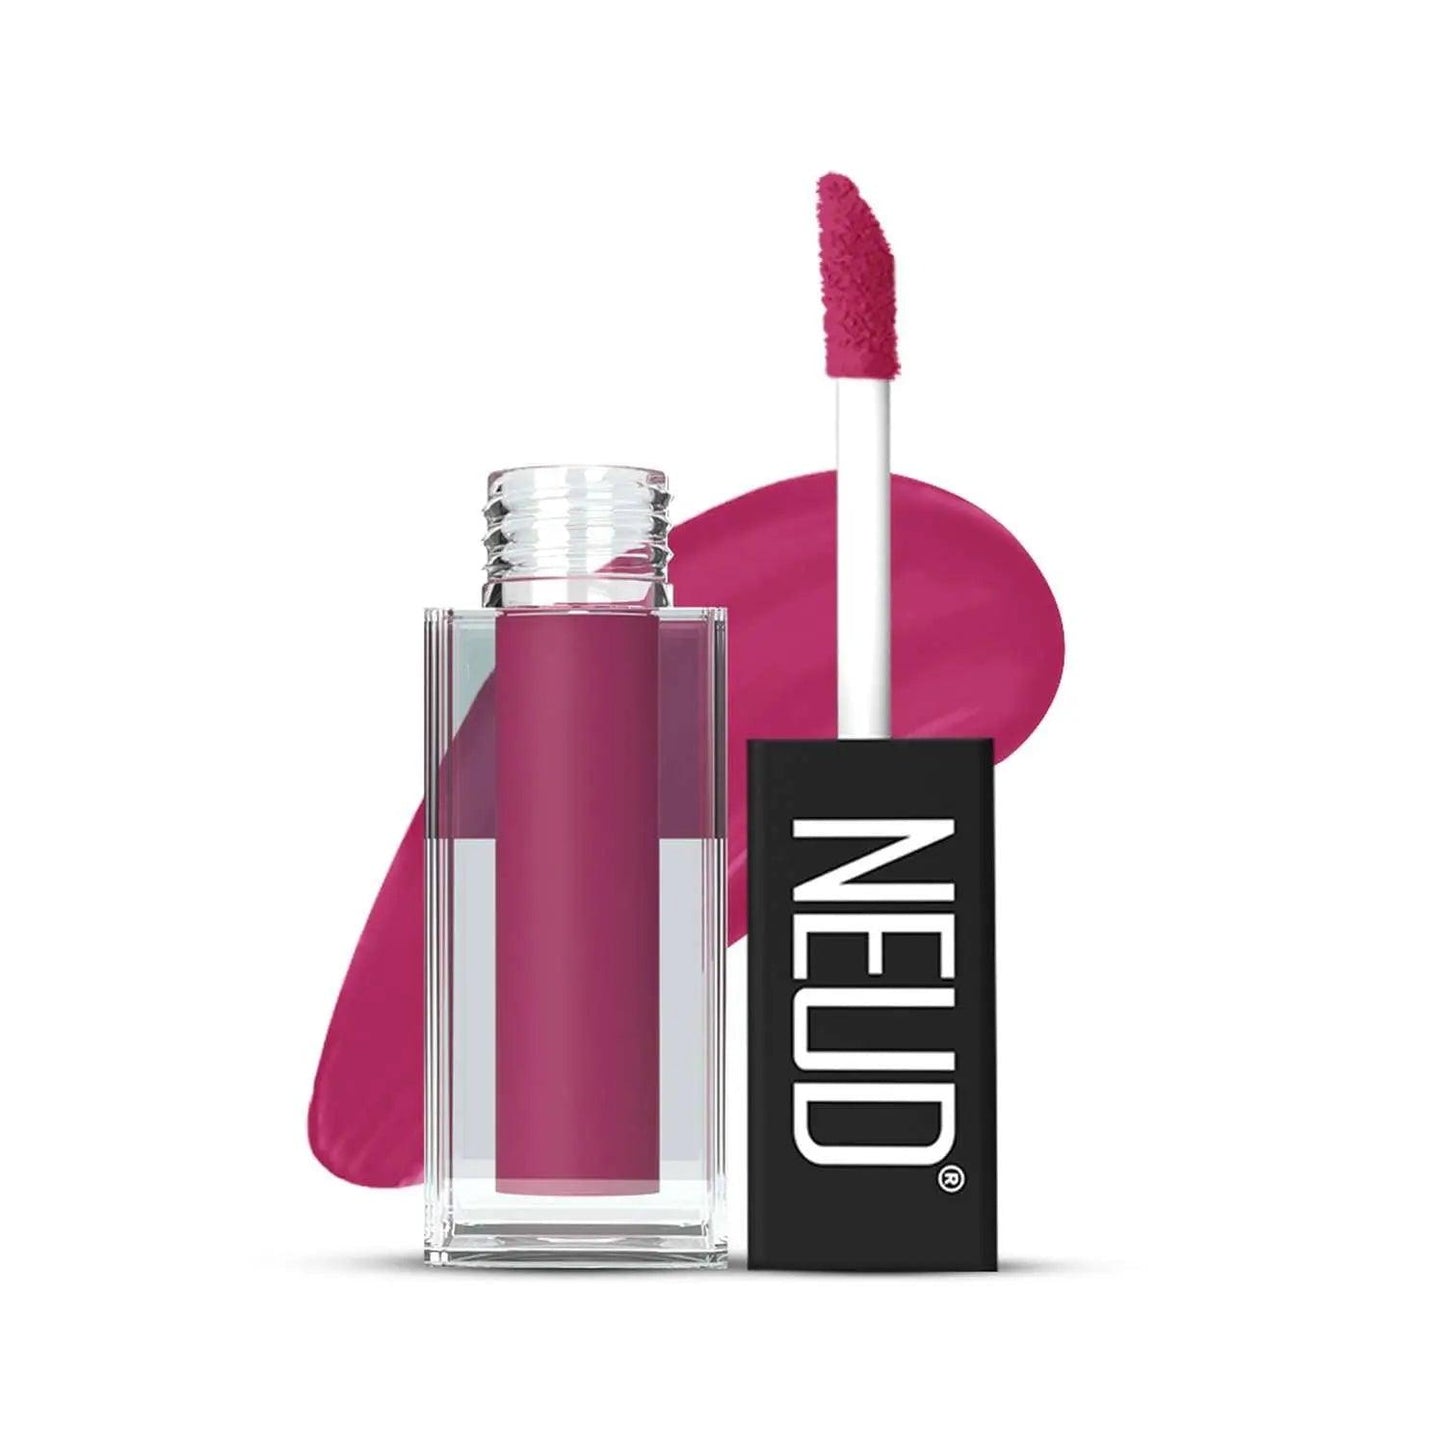 NEUD Matte Liquid Lipstick Quirky Tease with Jojoba Oil, Vitamin E and Almond Oil - Smudge Proof 12-hour Stay Formula with Free Lip Gloss 8906116281208